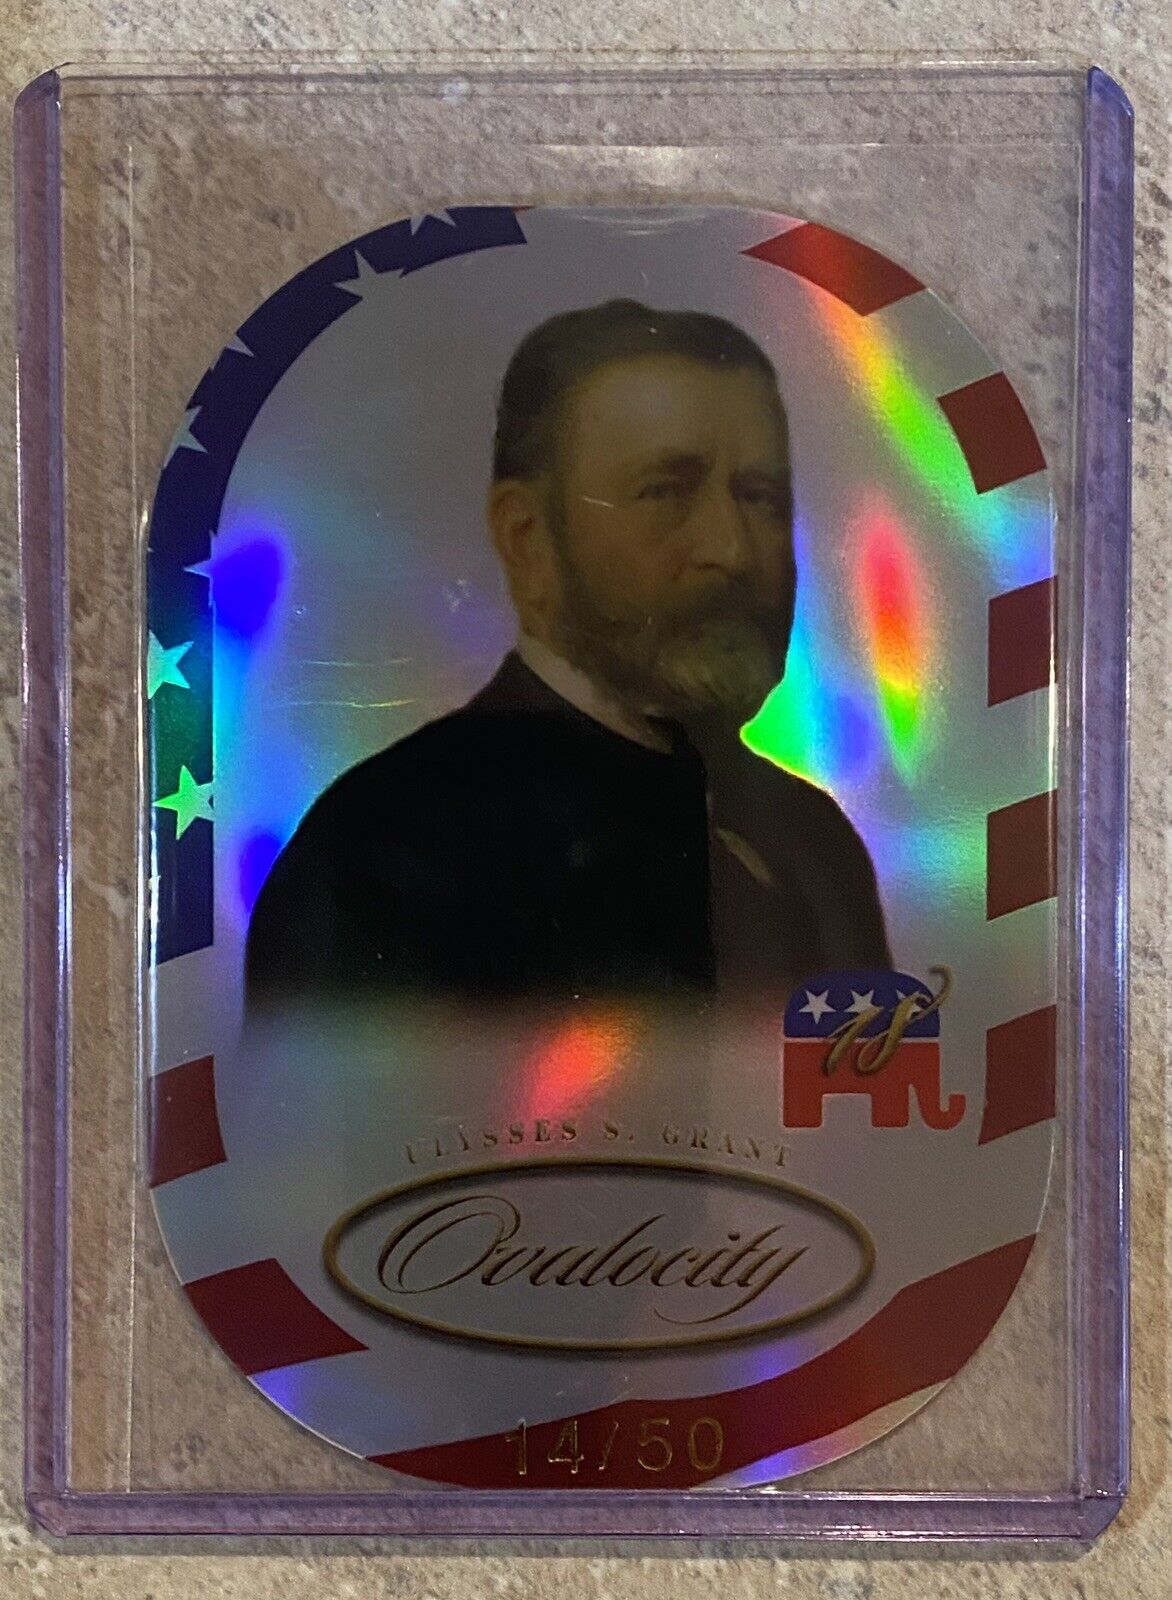 2023 PIECES OF THE PAST ULYSSES S GRANT OVALOCITY 14/50  